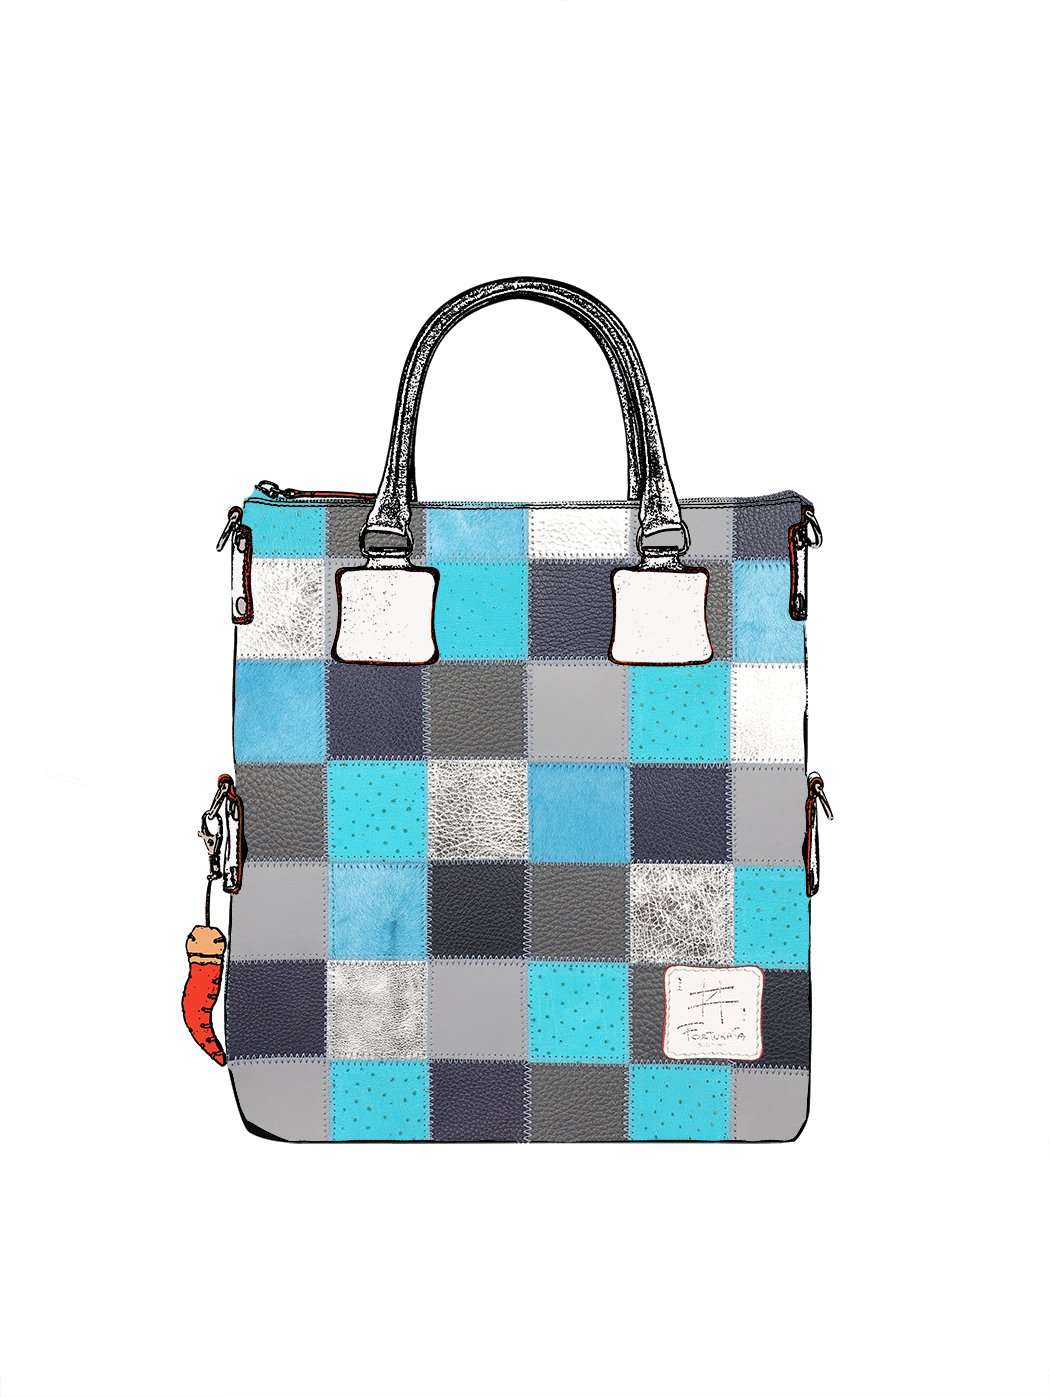 Leather patchwork tote, patchwork bag, giant leather tote, pastel